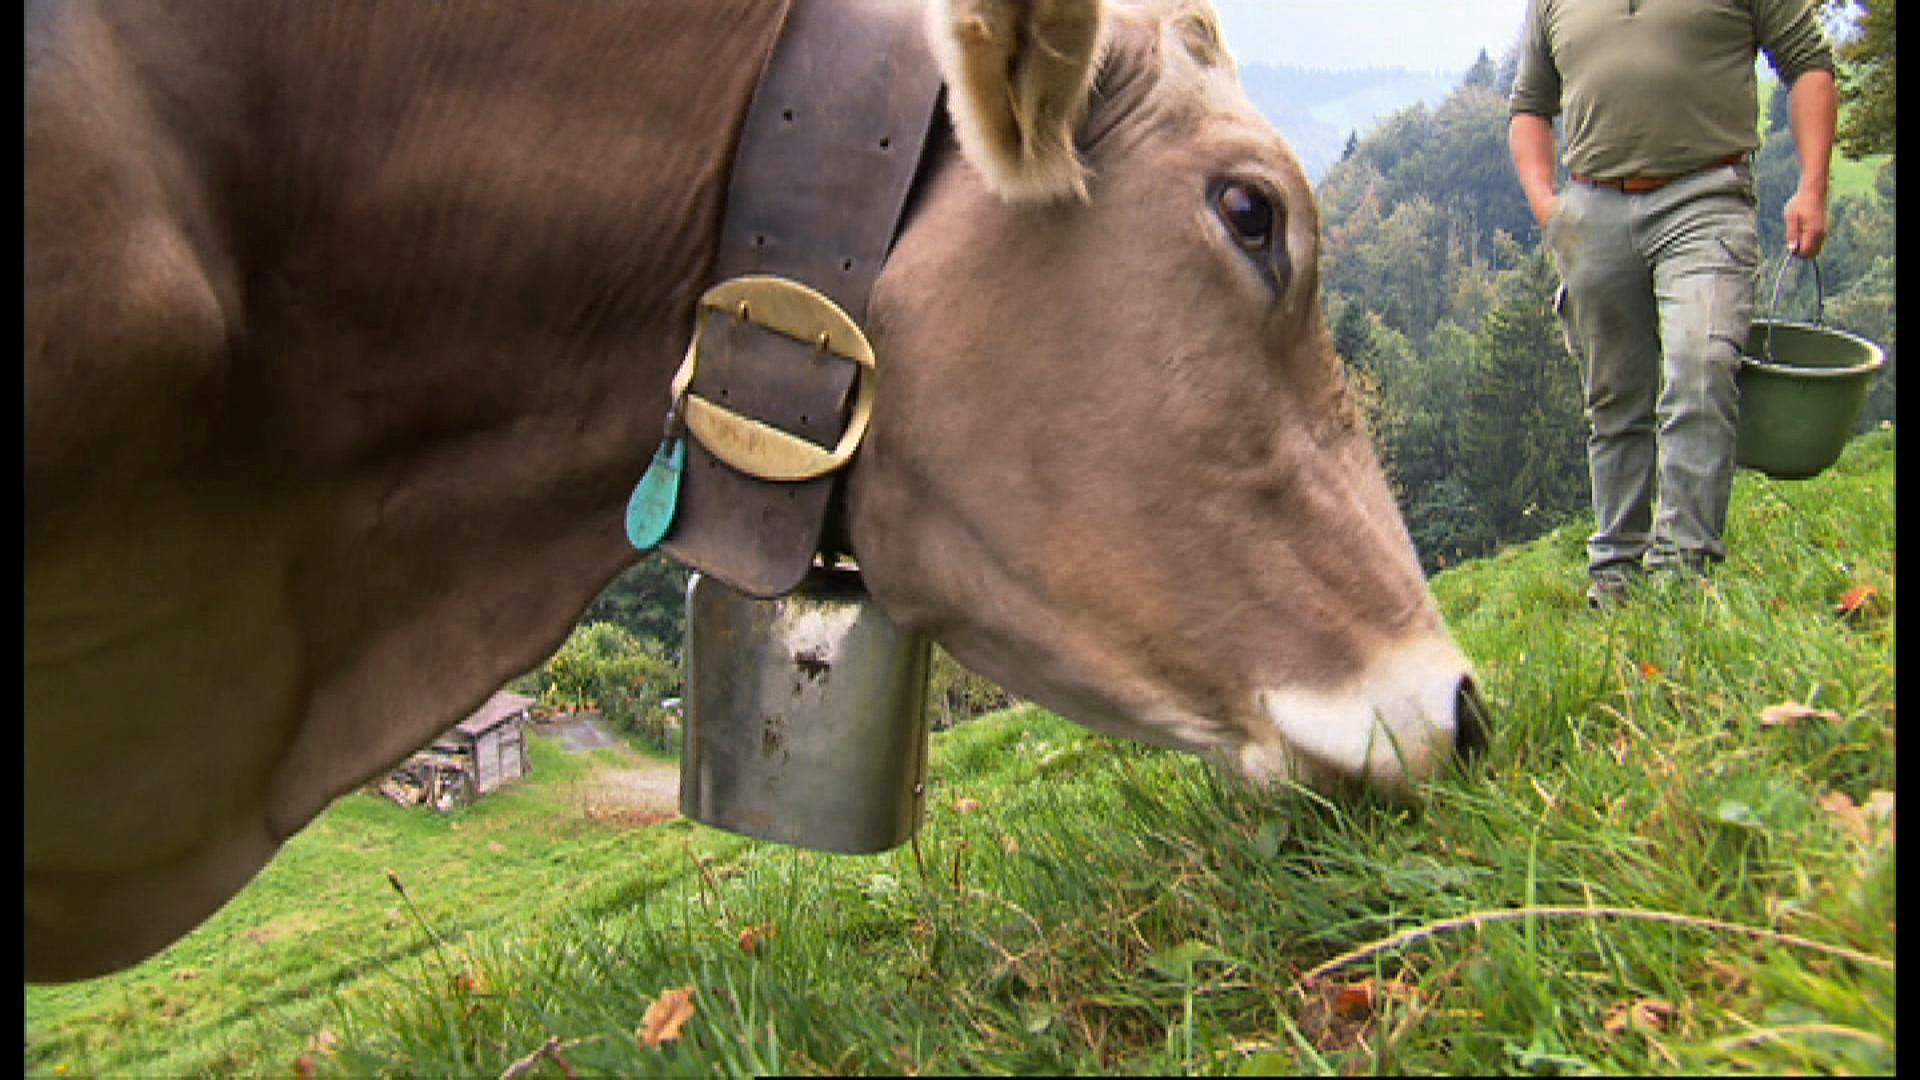 Study shows cows bothered by bells - SWI